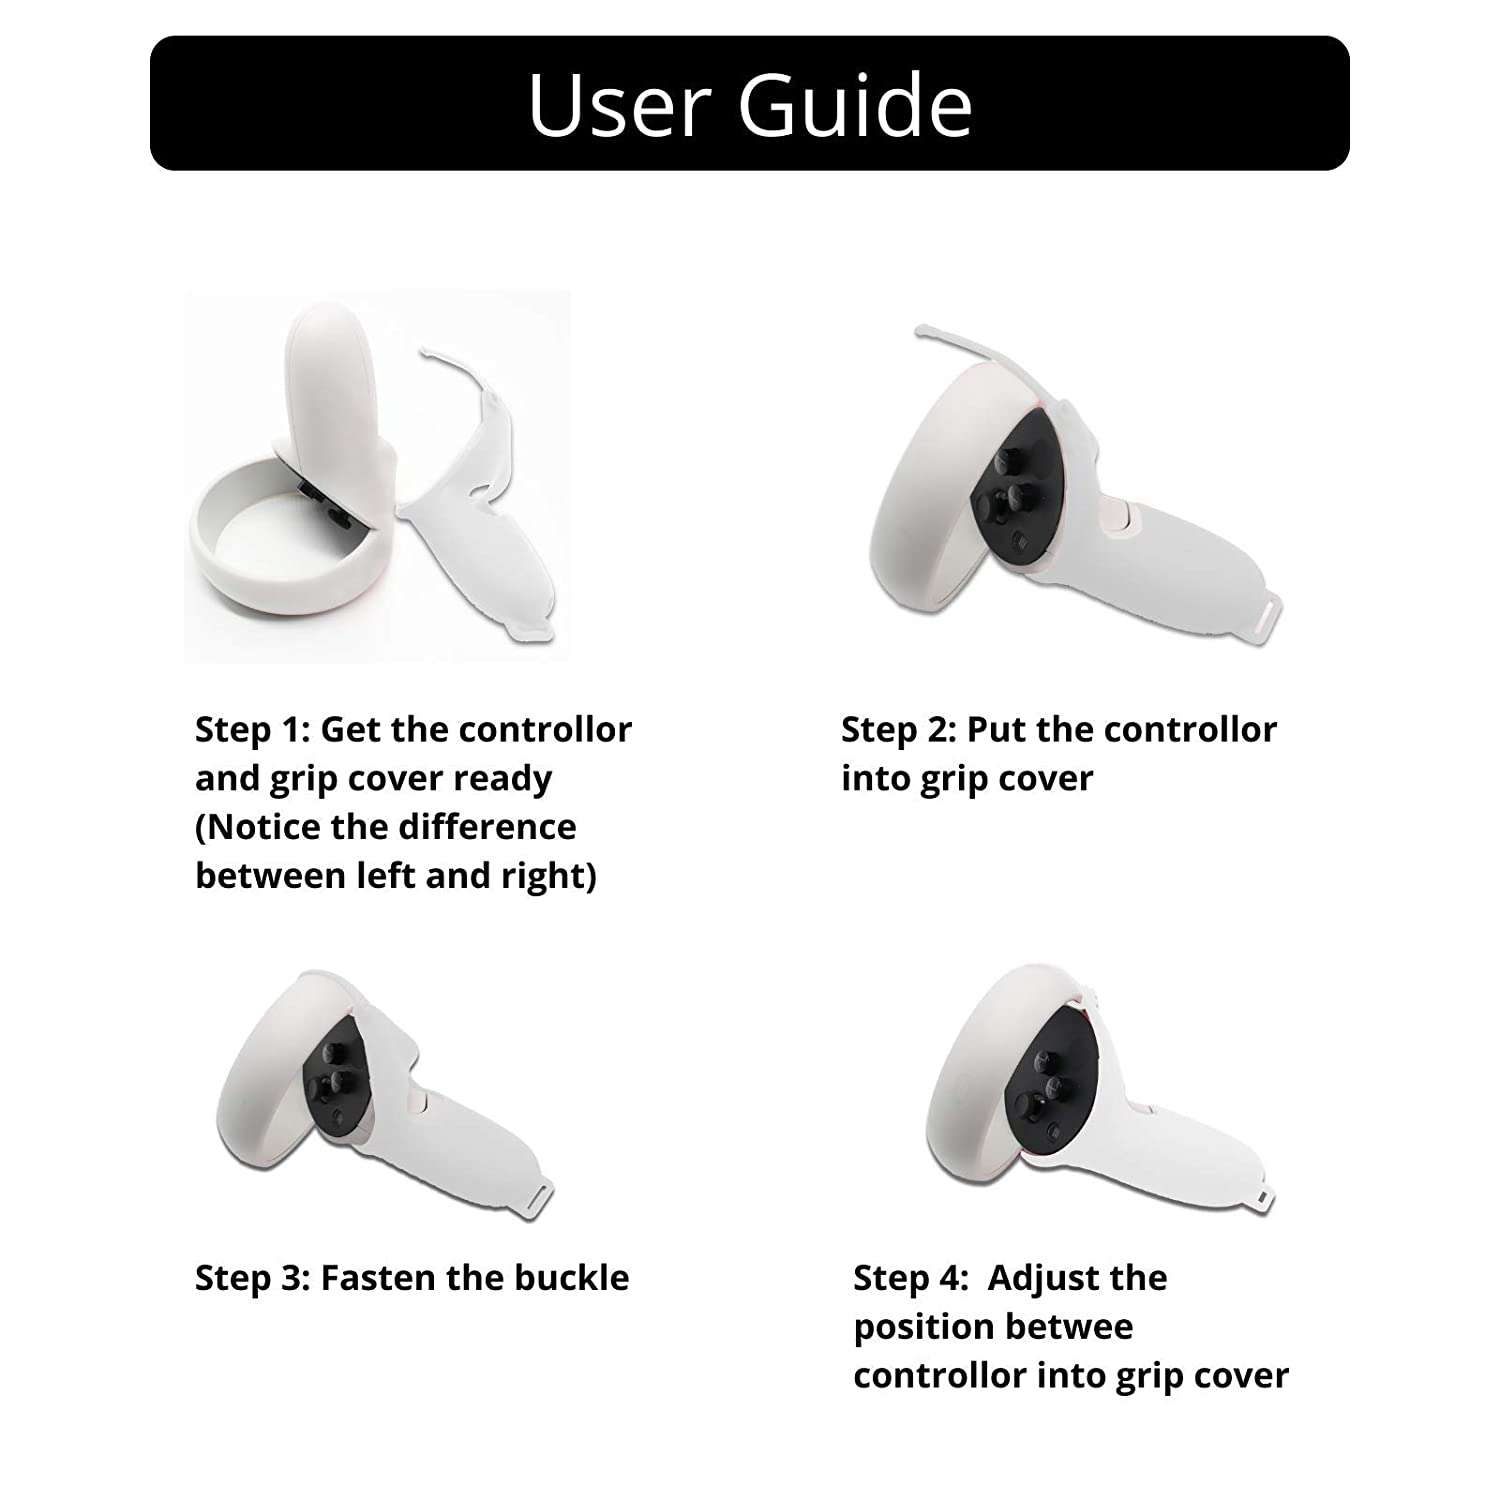 Grip cover user guide: Insert and adjust controller in grip cover.